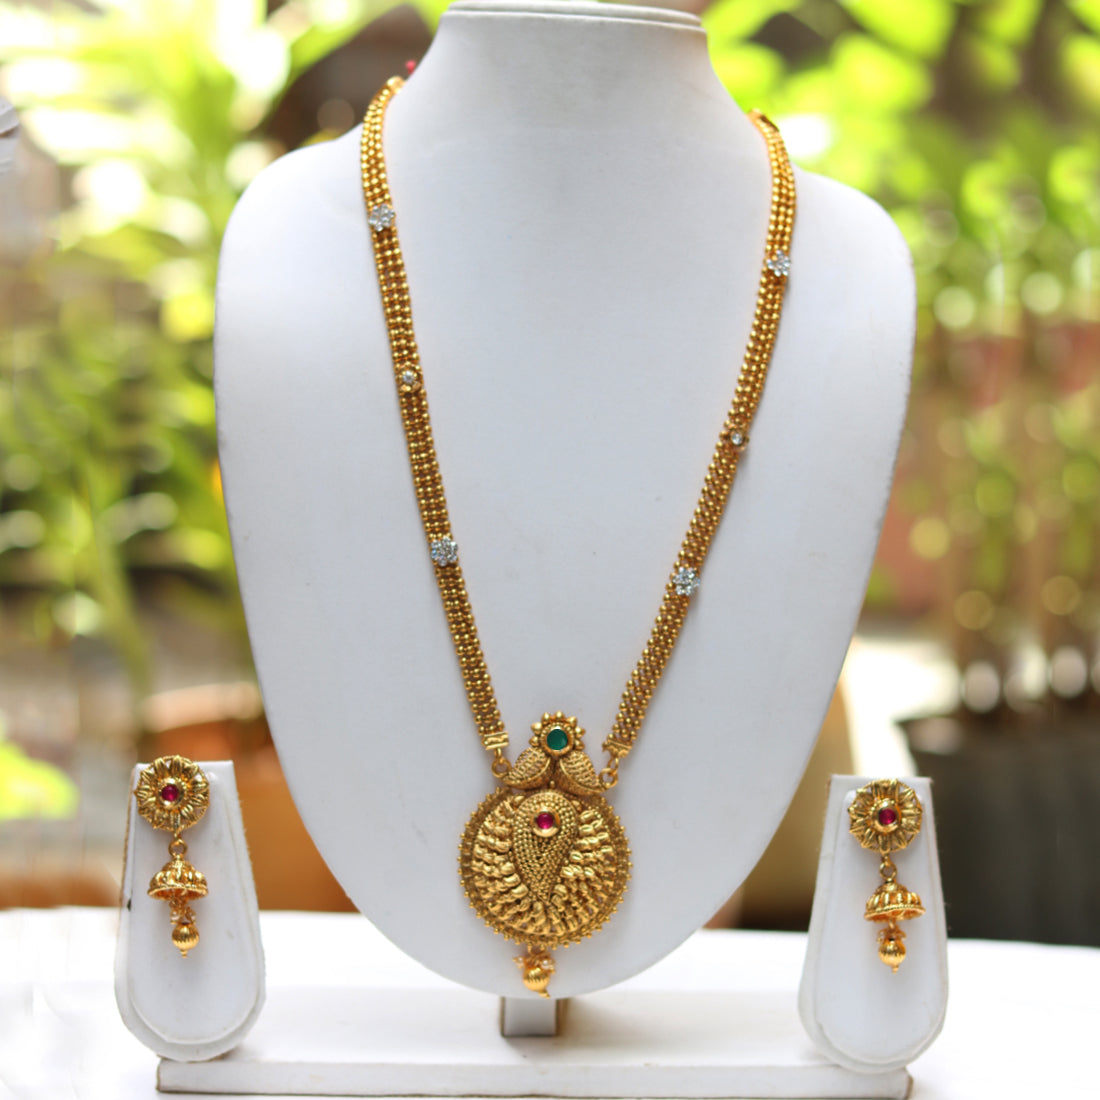 Gold Plated Round Mango Pendant Necklace With Jhumki